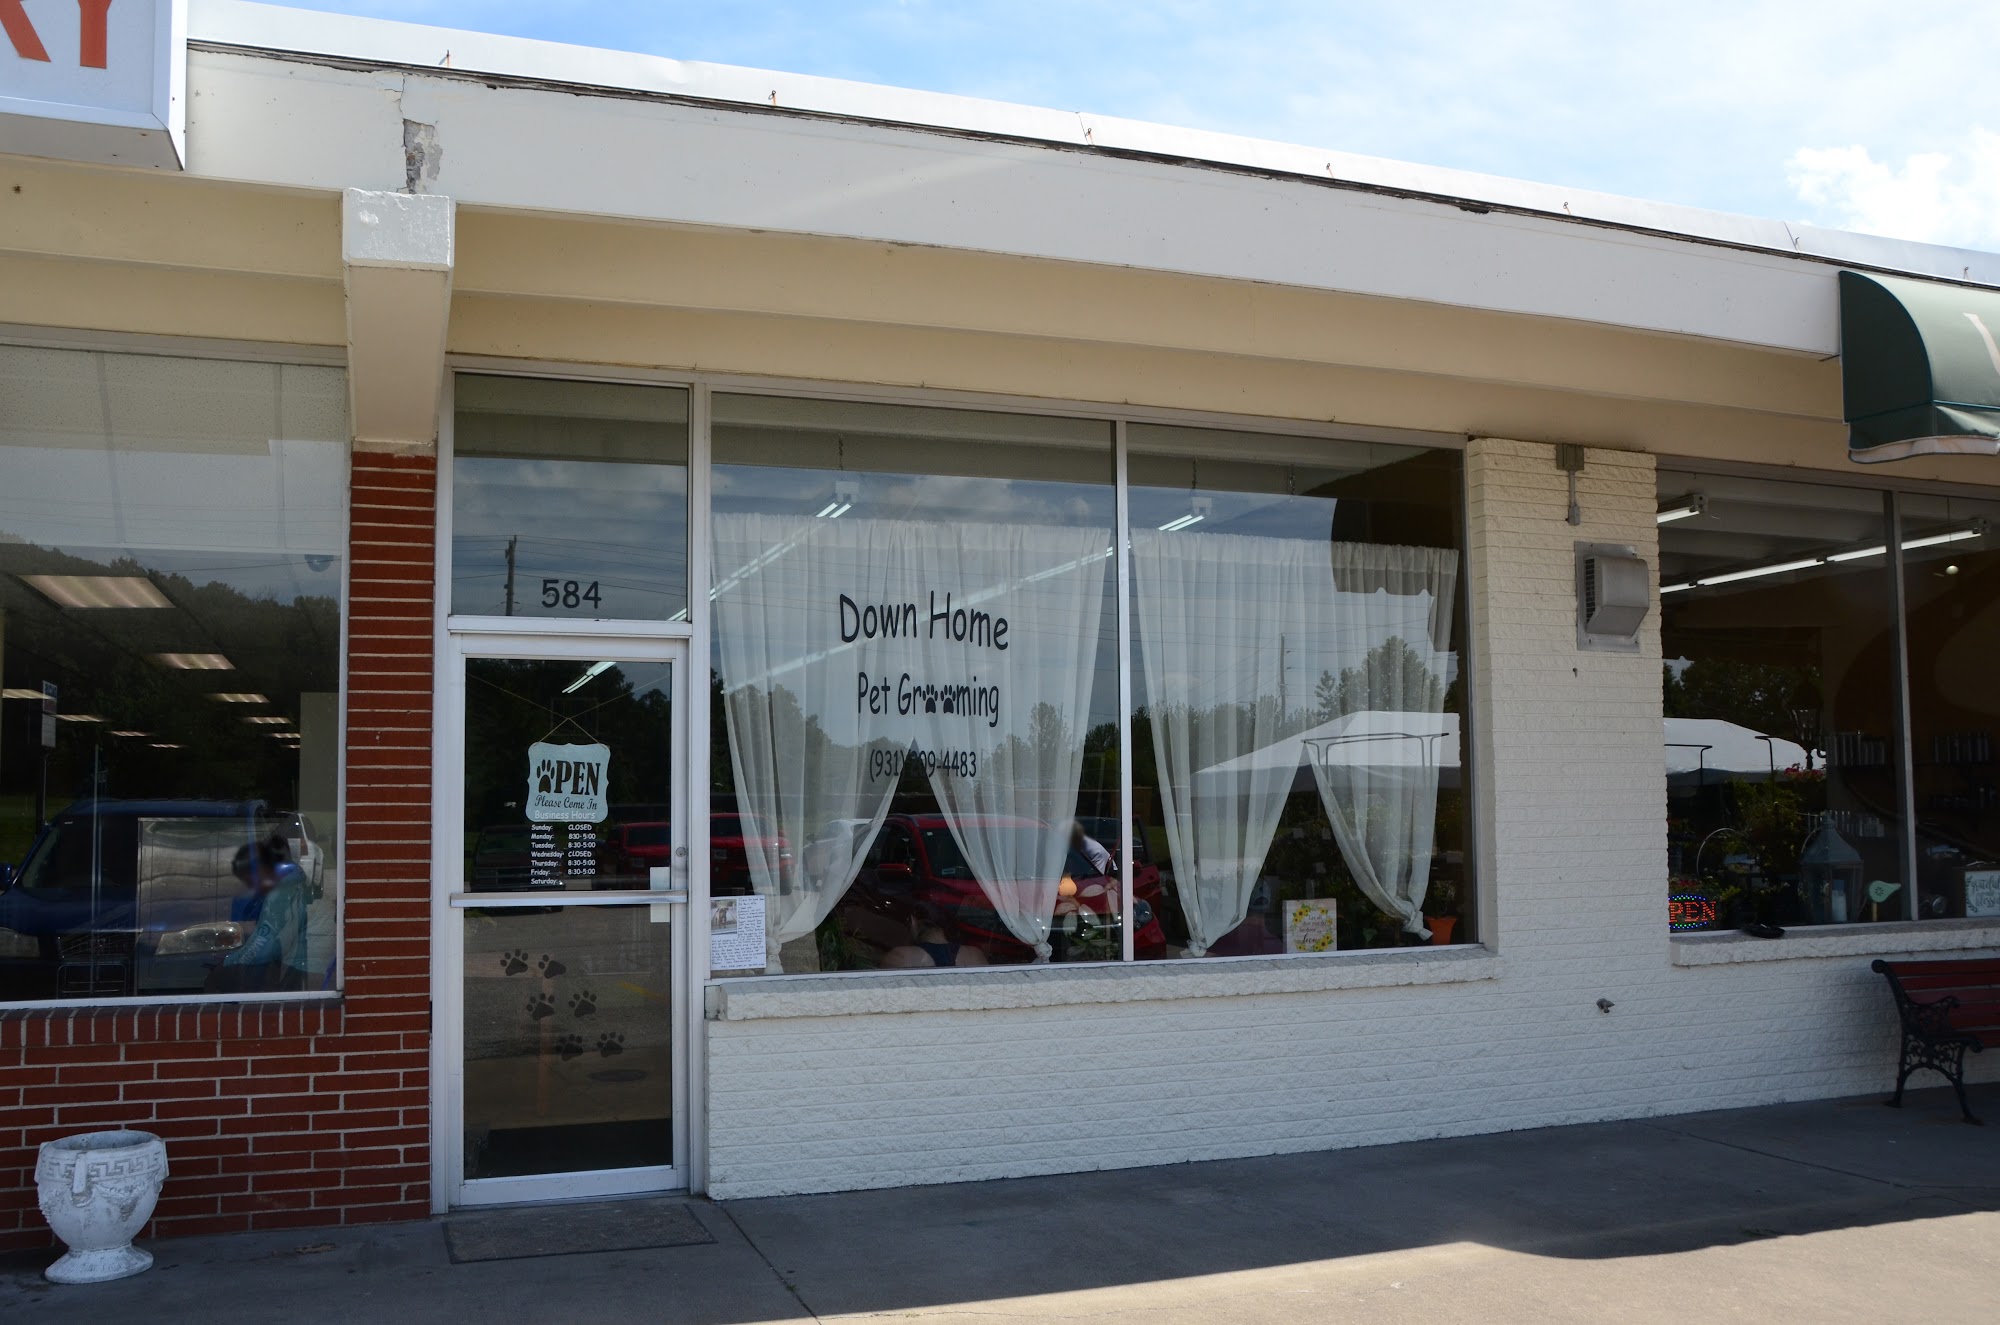 Down Home Pet Grooming 584 Broadway Ave, New Johnsonville Tennessee 37134